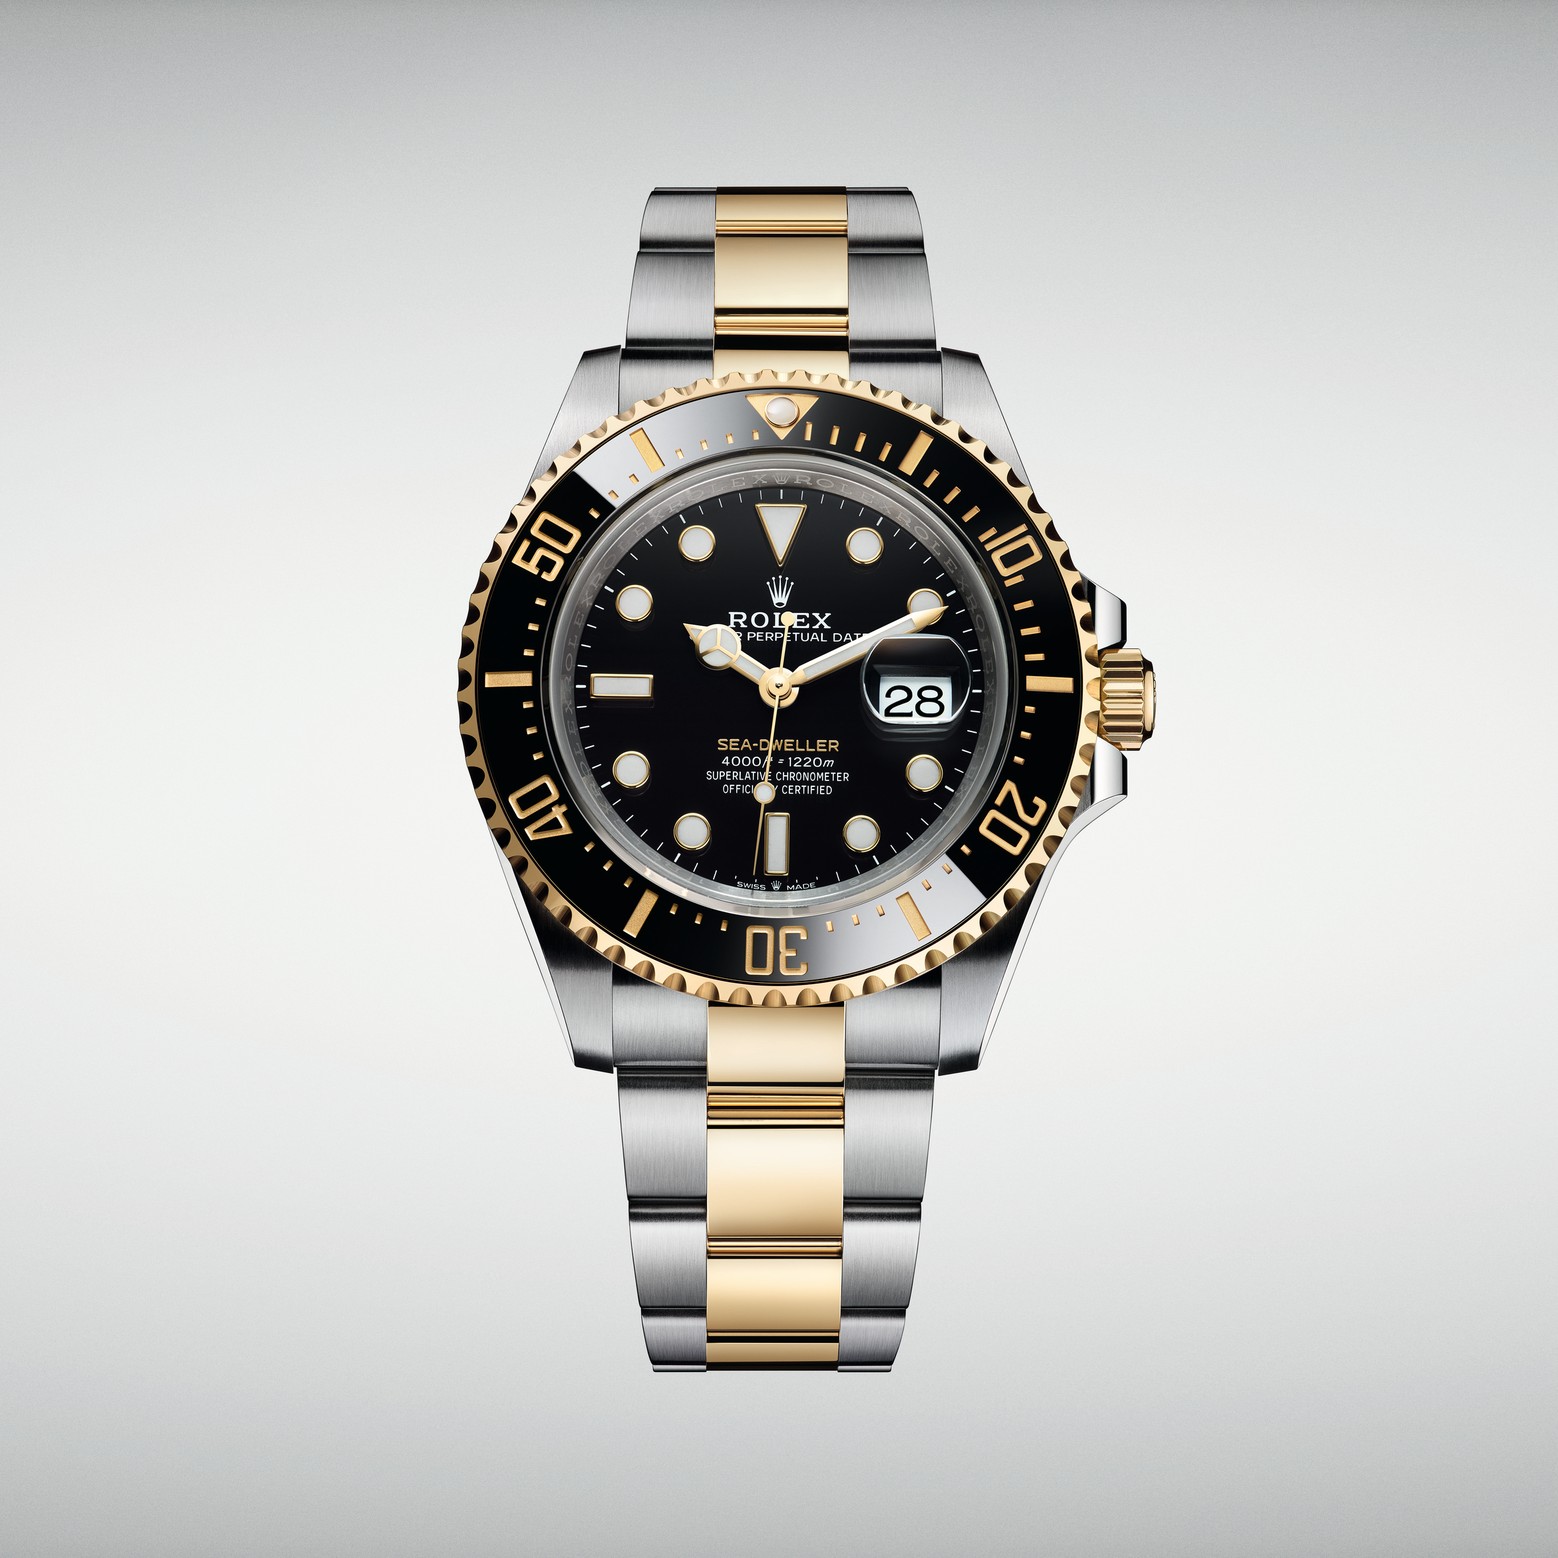 Baselworld 2019: Rolex Presents Its New Watches – WristReview.com –  Featuring Watch Reviews, Critiques, Reports & News